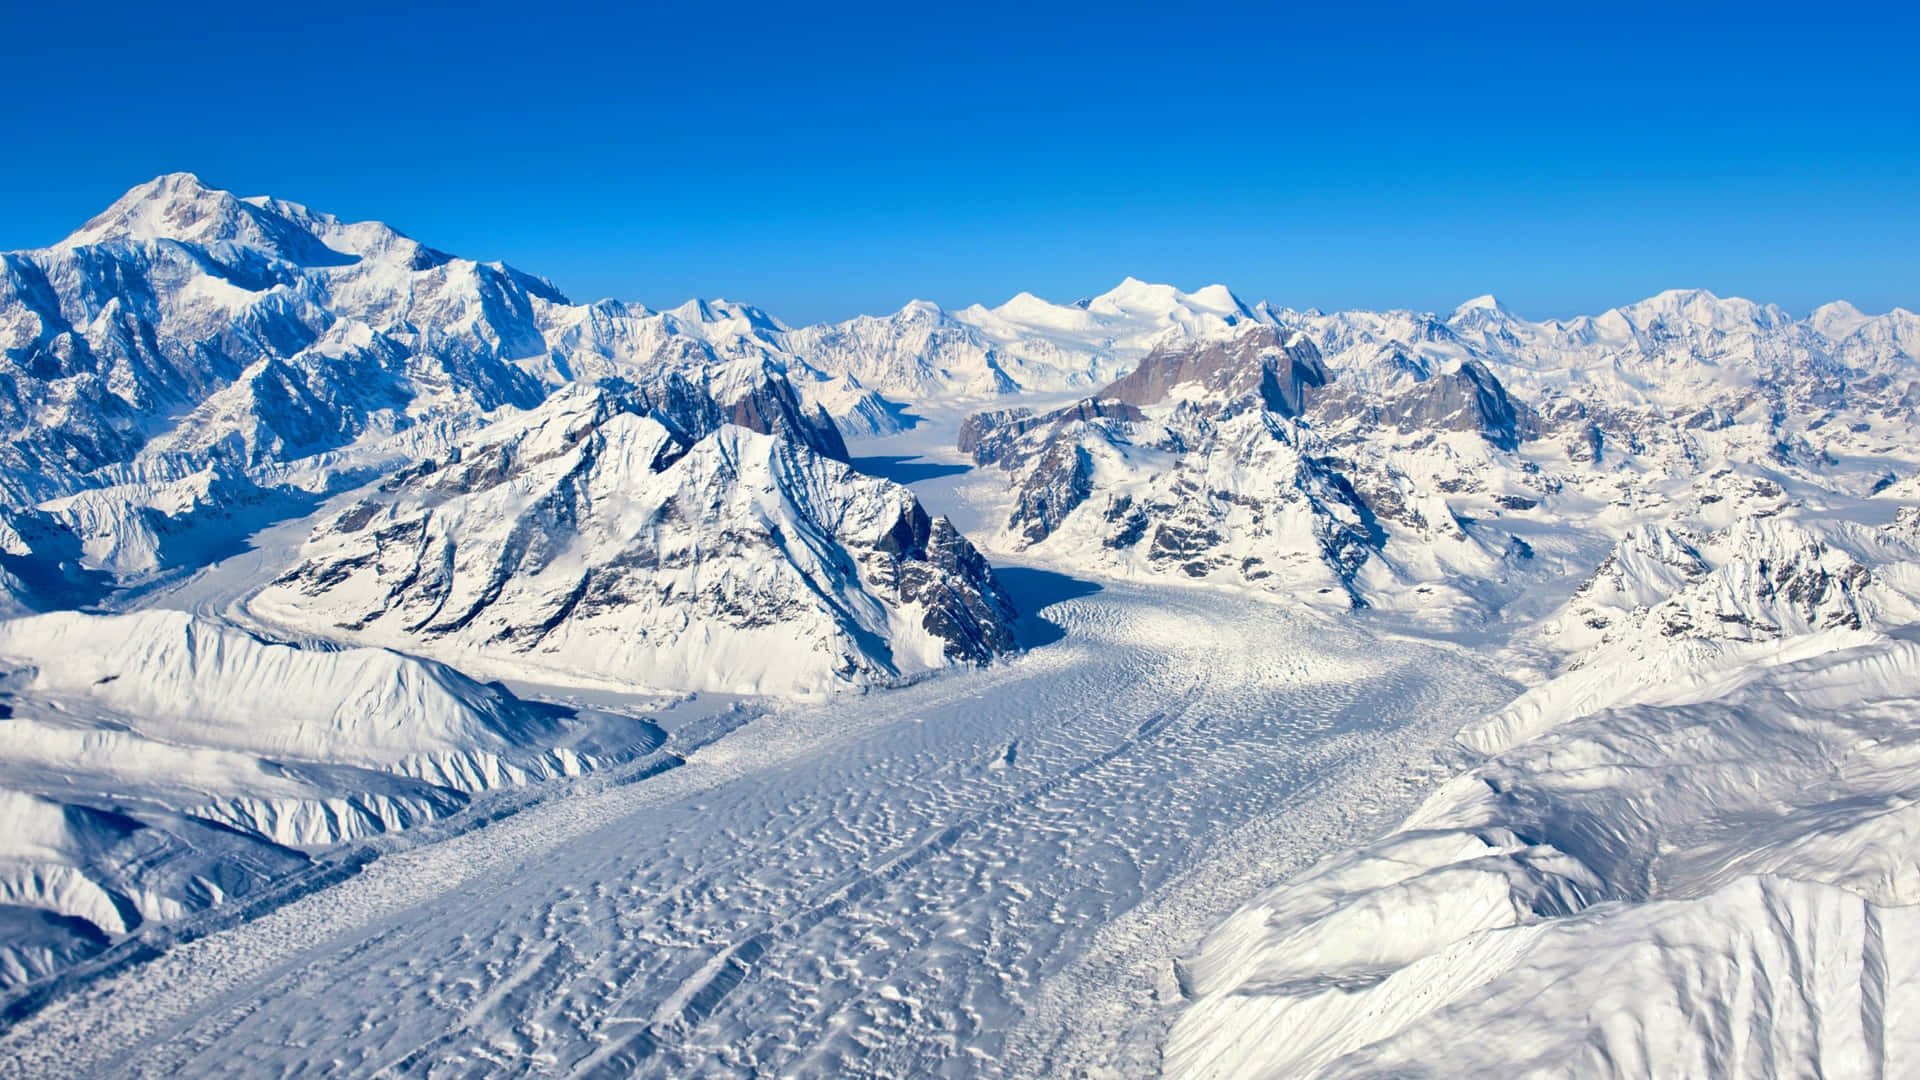 A View Of A Snow Covered Mountain Range Wallpaper